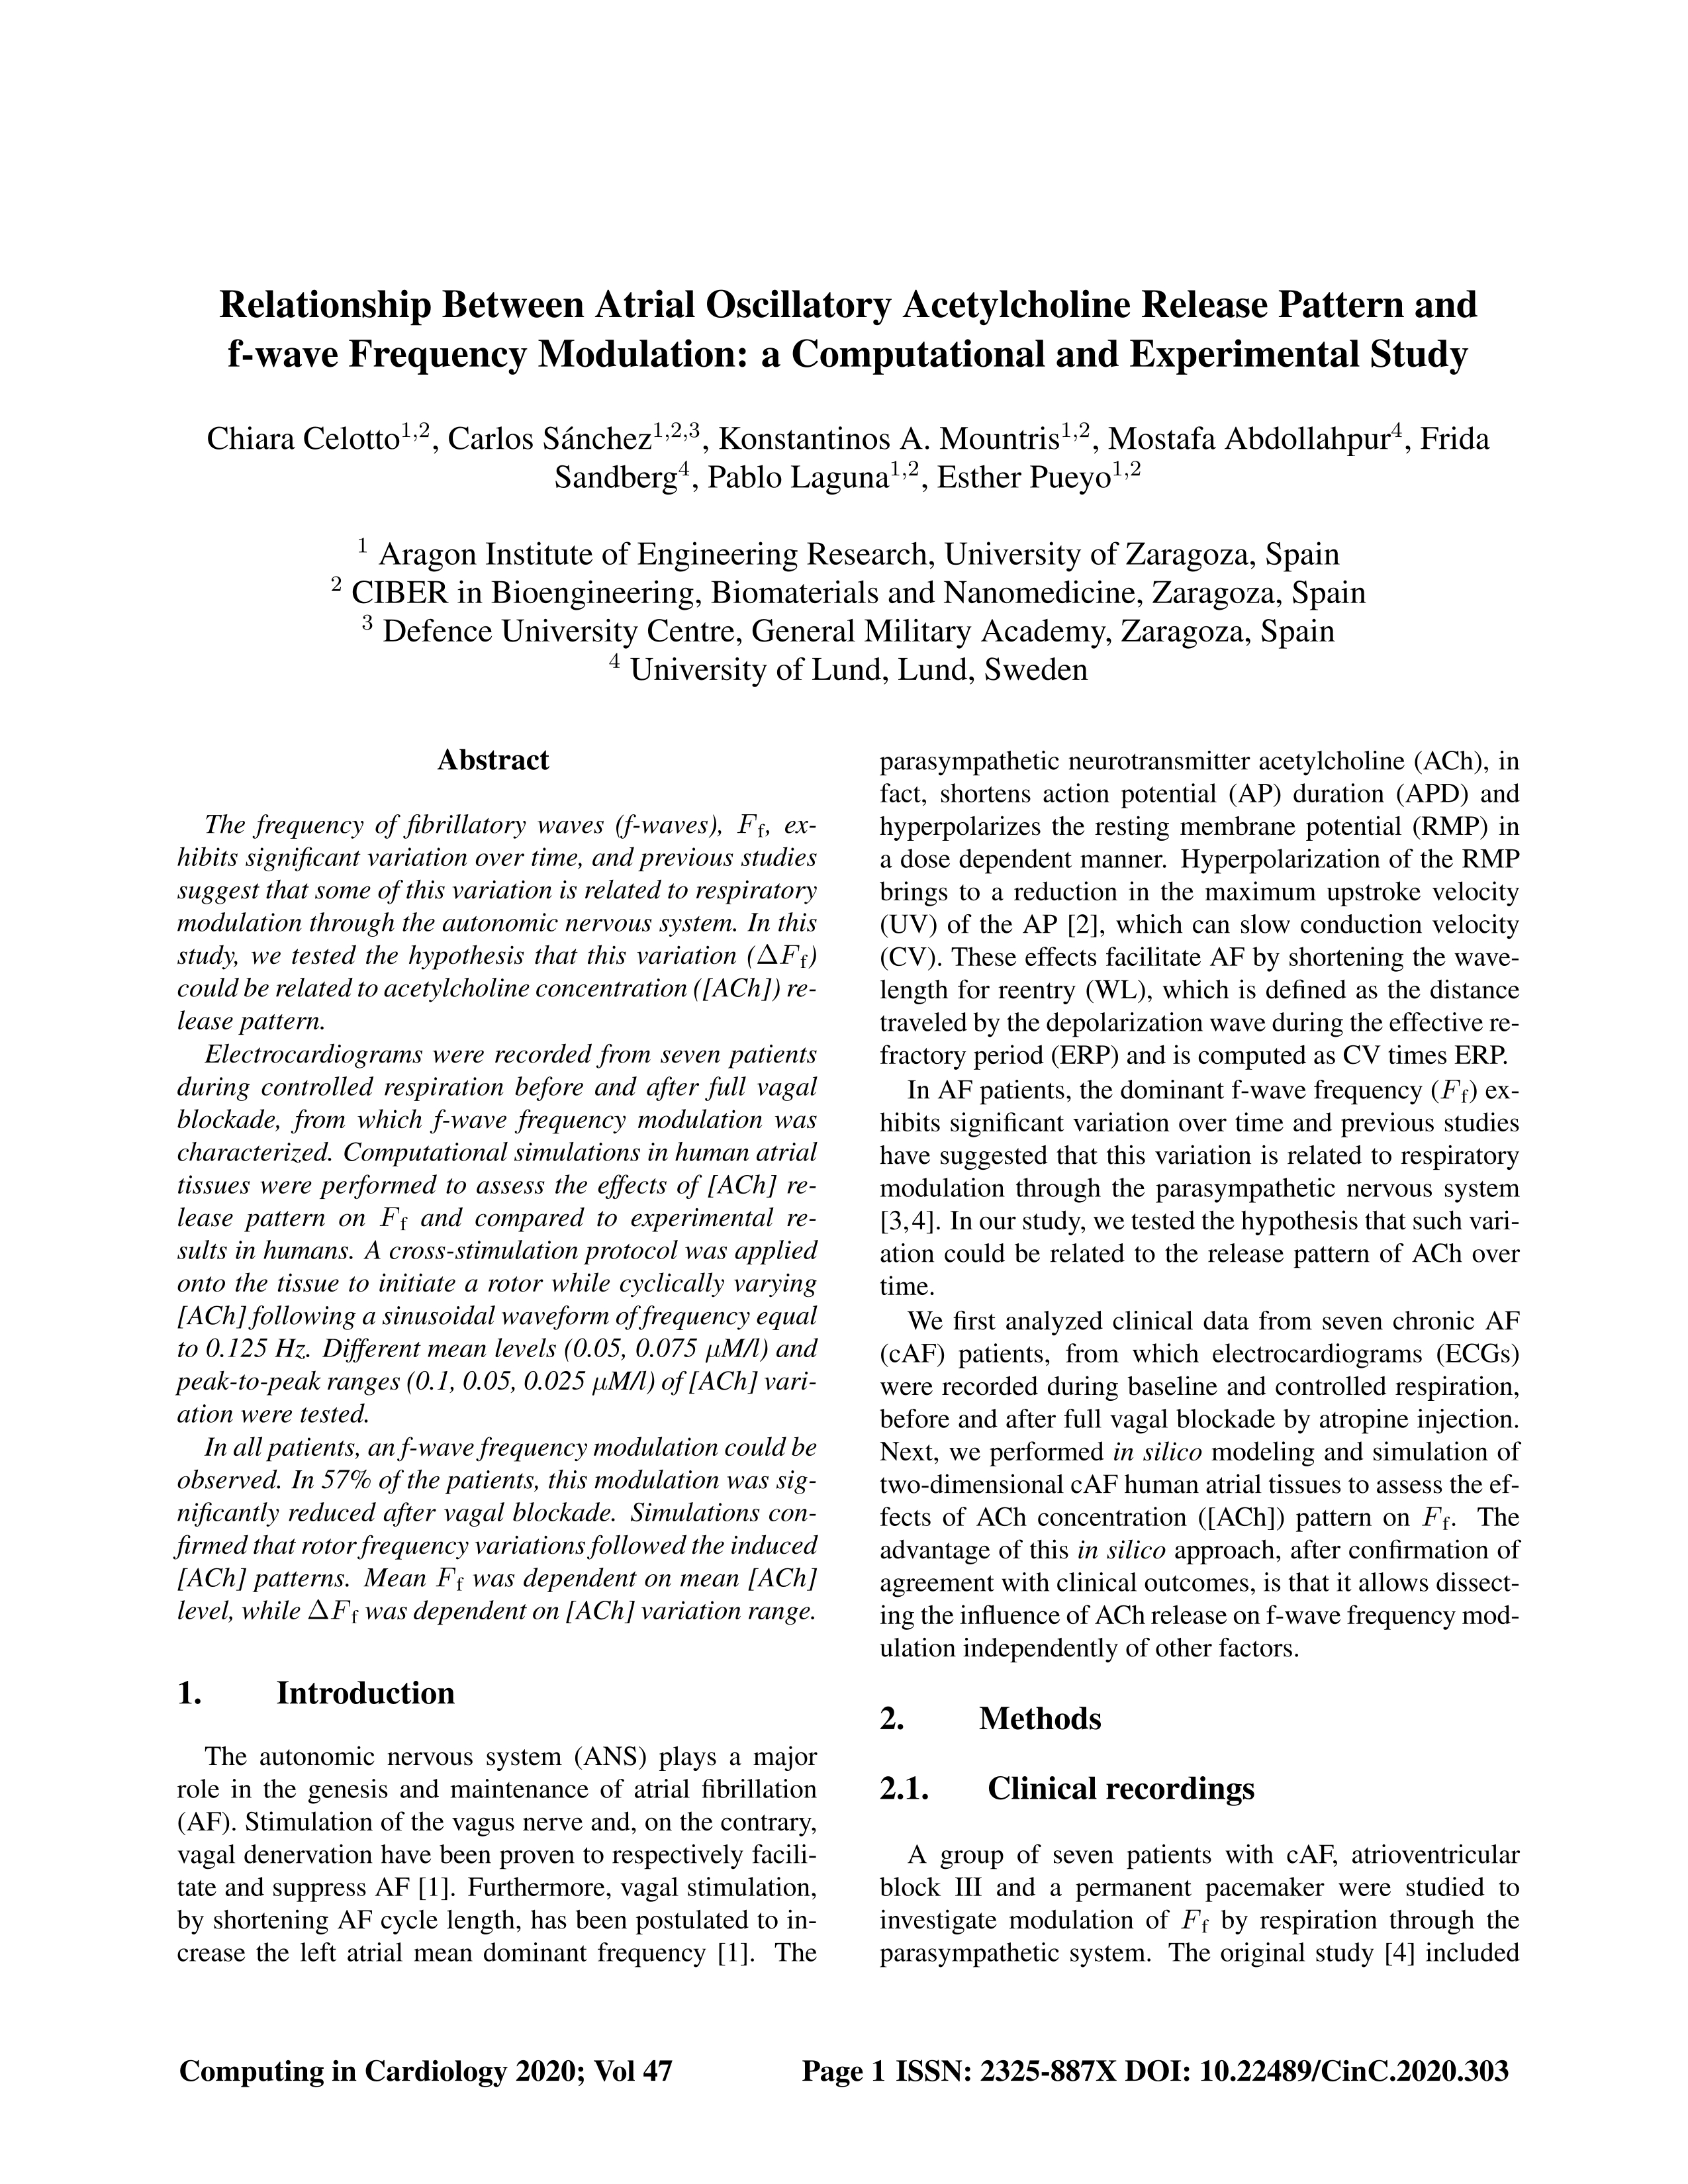 Relationship between Atrial Oscillatory Acetylcholine Release Pattern and f-wave Frequency Modulation: a Computational and Experimental Study